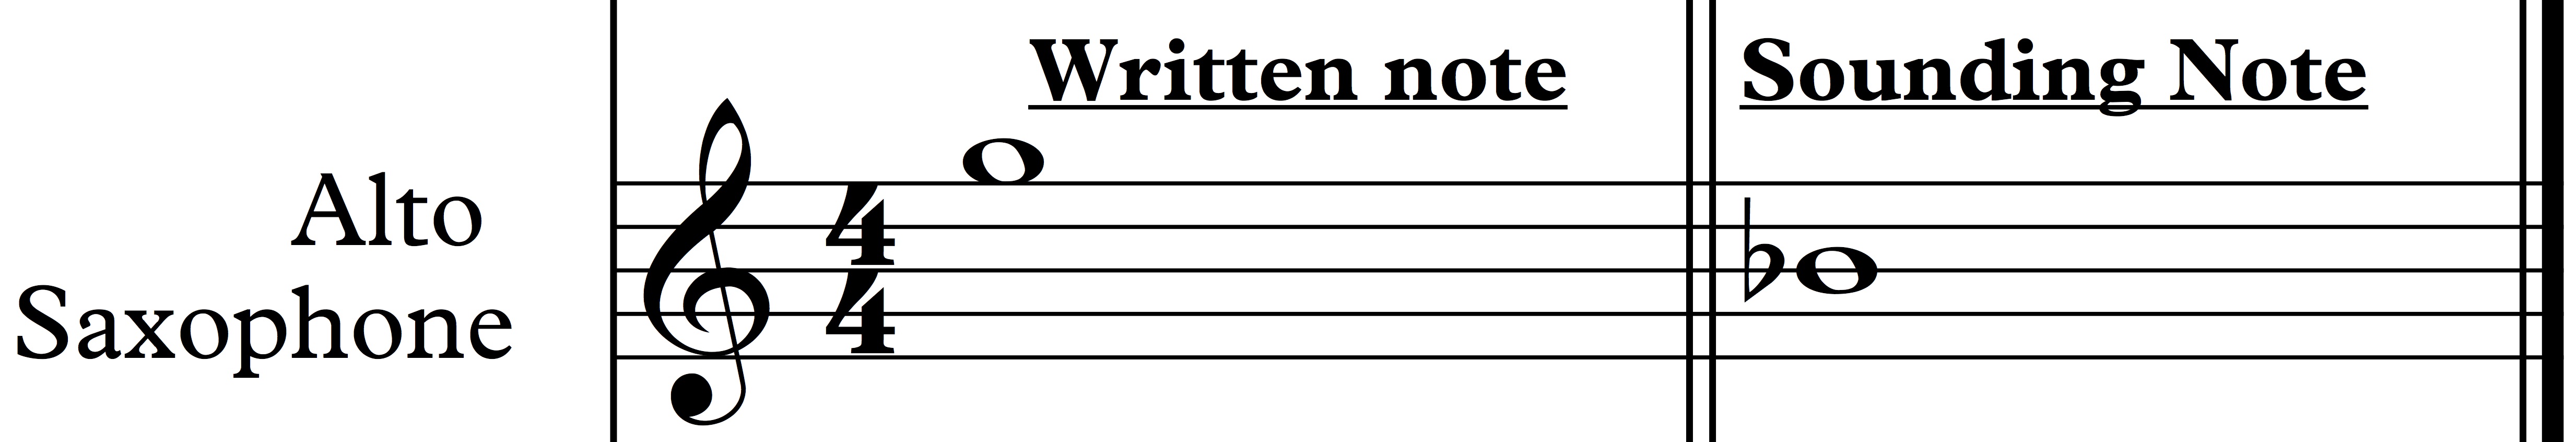 Concert Band Transposition Chart